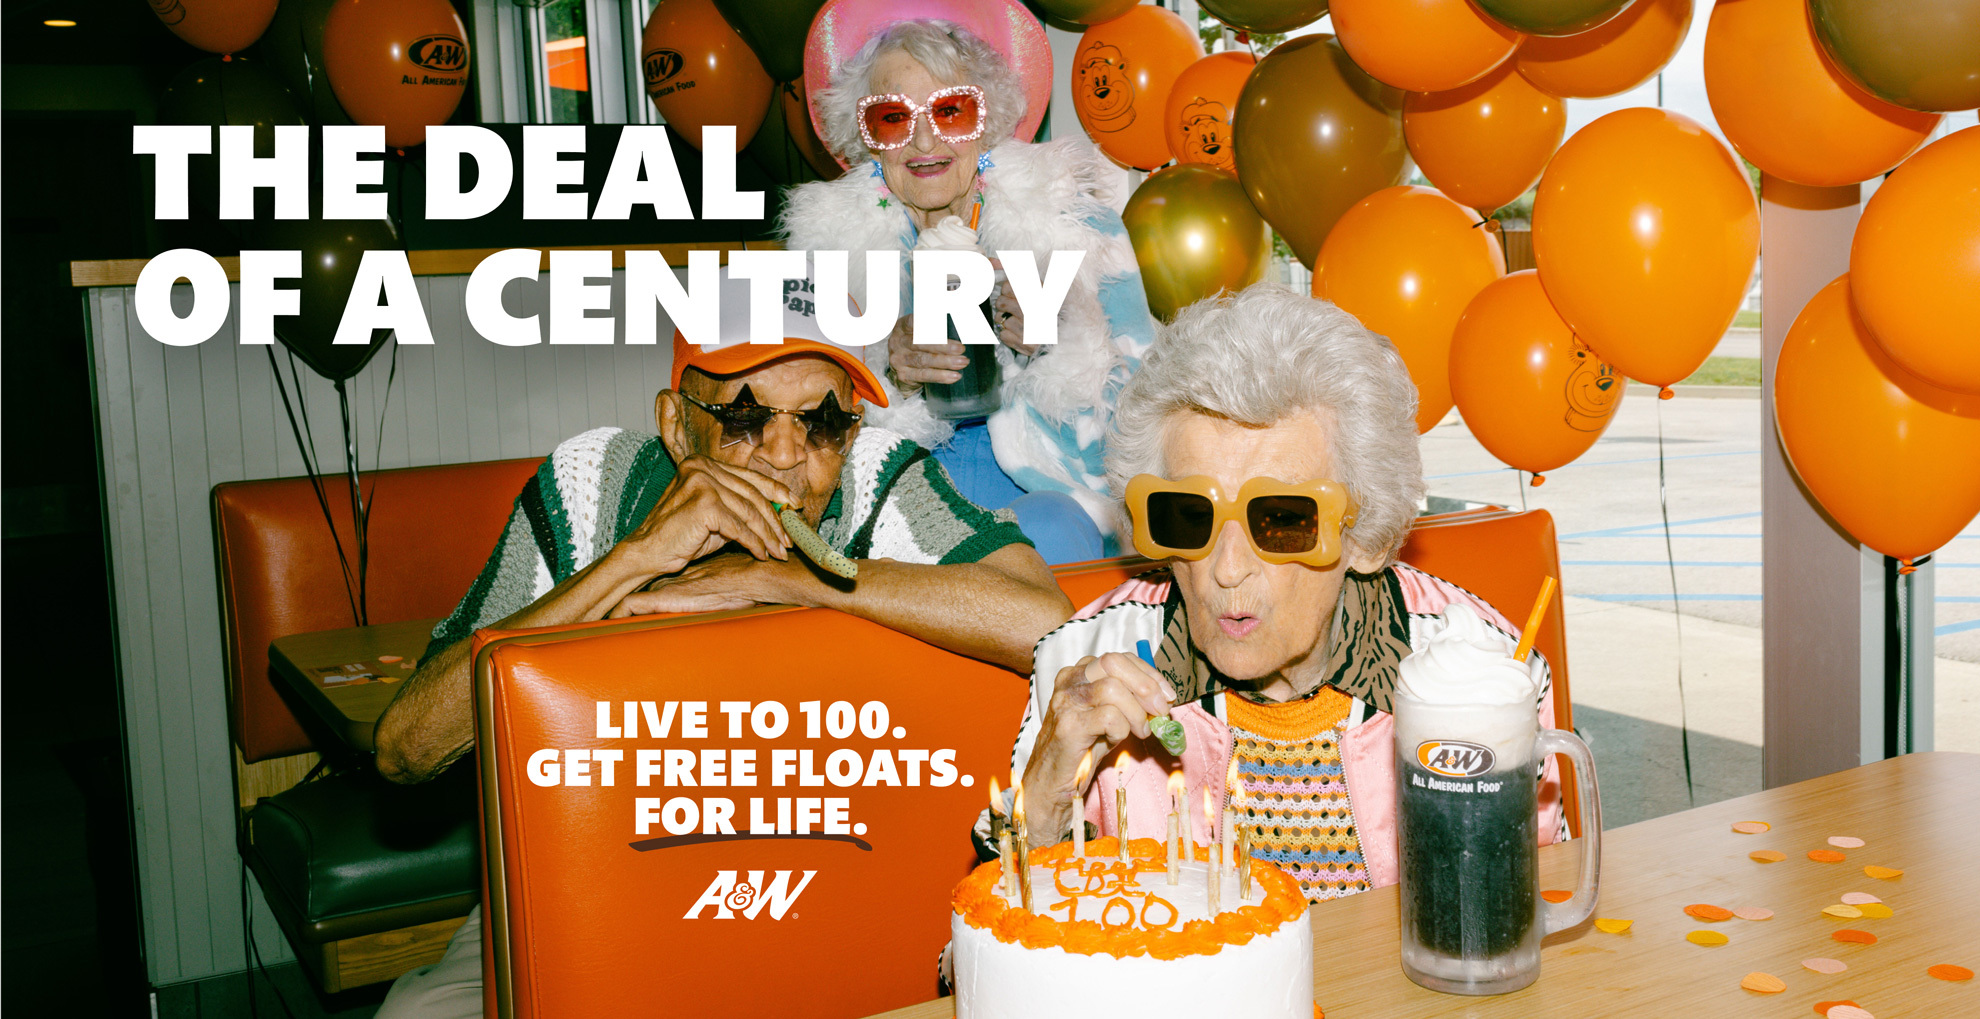 The Deal of the Century - Live to 100. Get free Floats. For life.